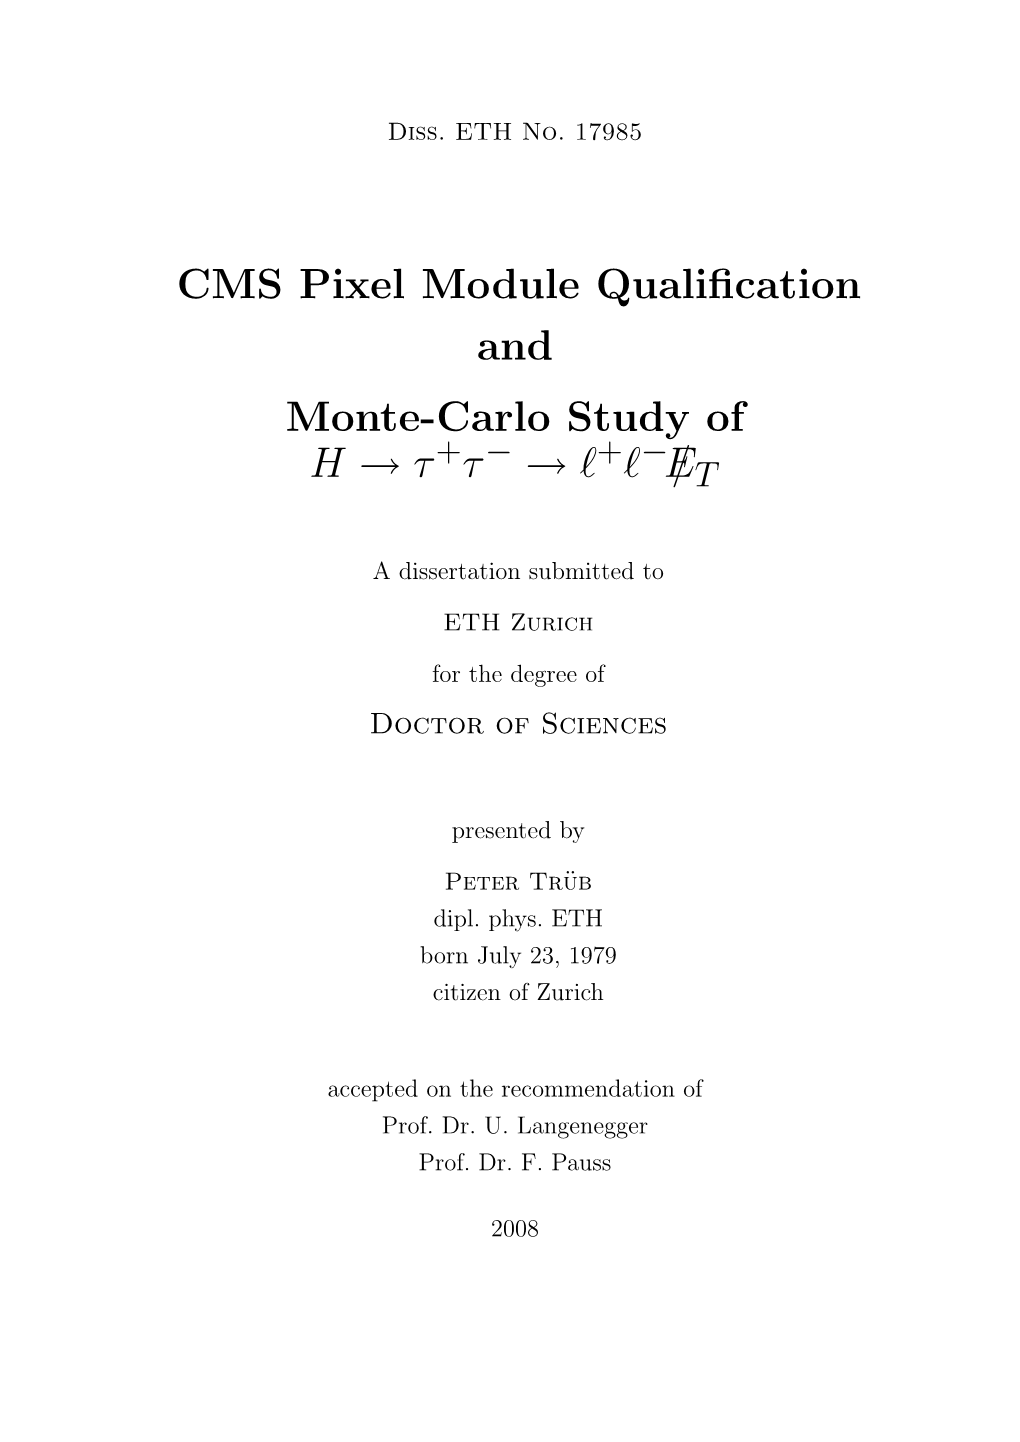 CMS Pixel Module Qualification and Monte-Carlo Study of H